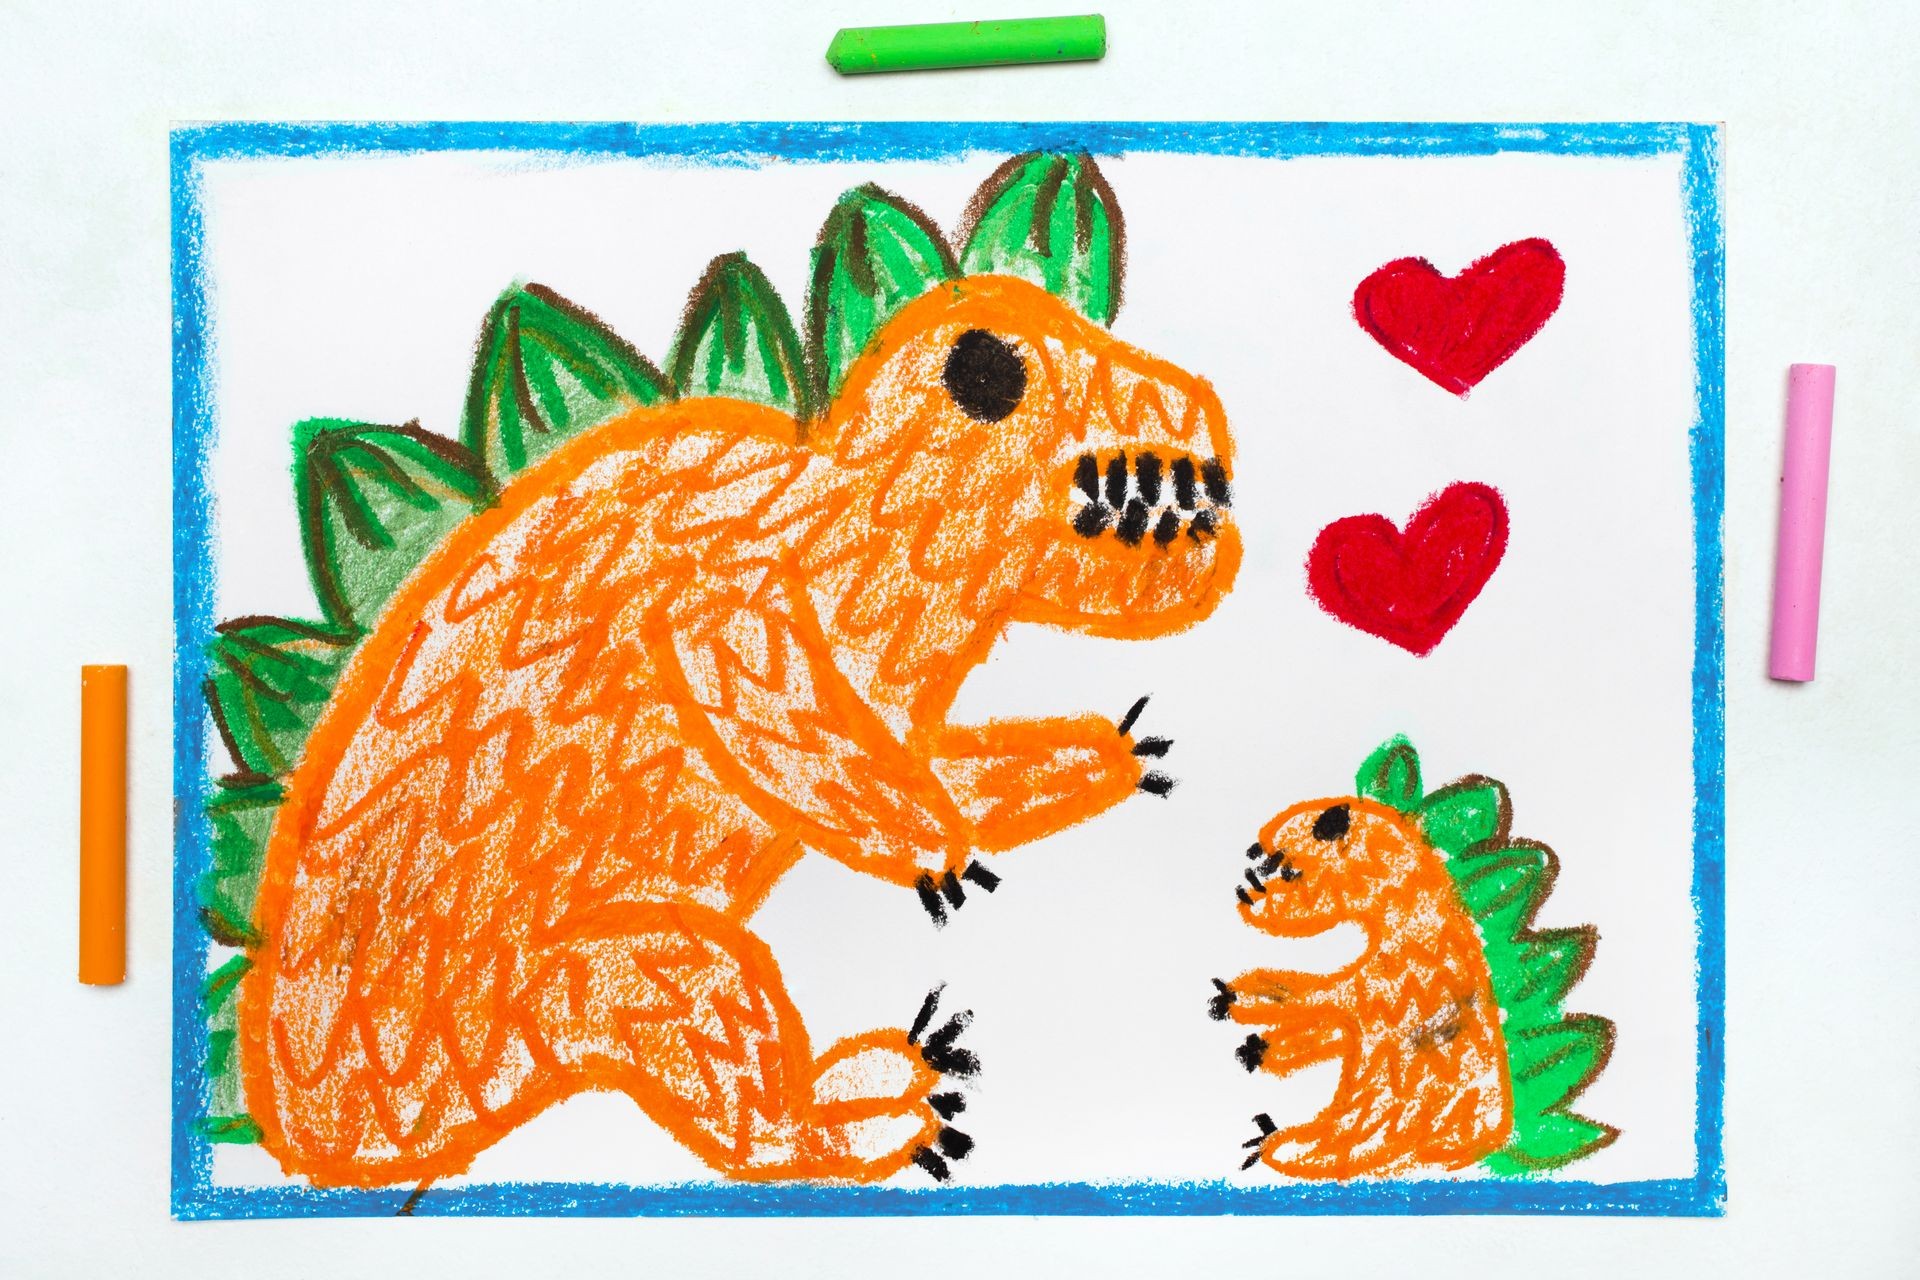 Colorful drawing: Two cute monsters, mother and her child. Orange dragons and hearts.